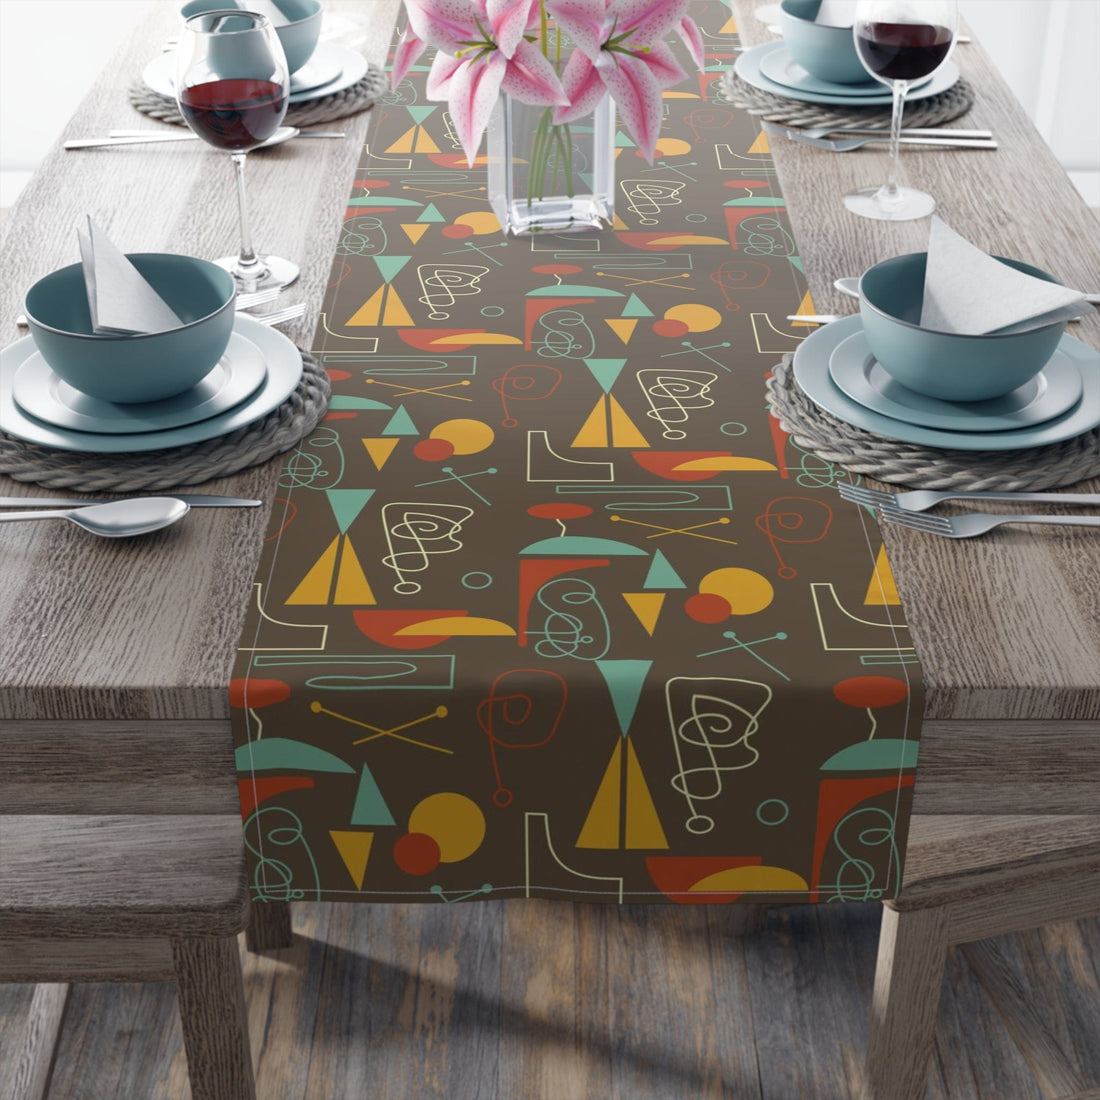 Kate McEnroe New York 1950s Atomic Retro Mid Century Modern Geometric Abstract Table Runner (Cotton, Poly)Table Runners23628200490899828509